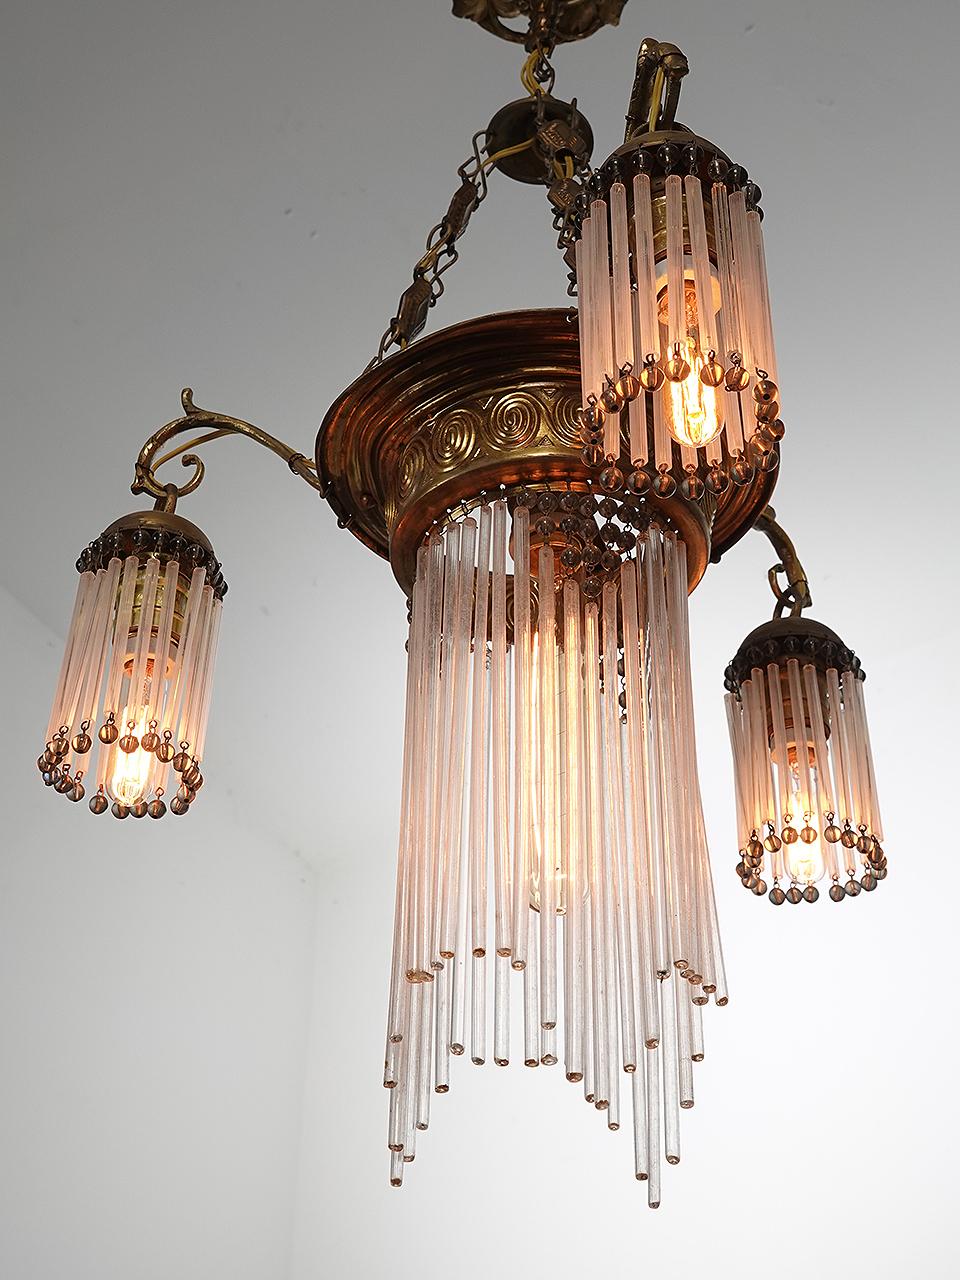 You can call this delicate lamp Jugendstil or Art Nouveau and the look is amazing. The style is very distinctive. This lamp has all of its hand blown hollow glass rods with no damage, and there are over 100 of them. The decorative embossed metal